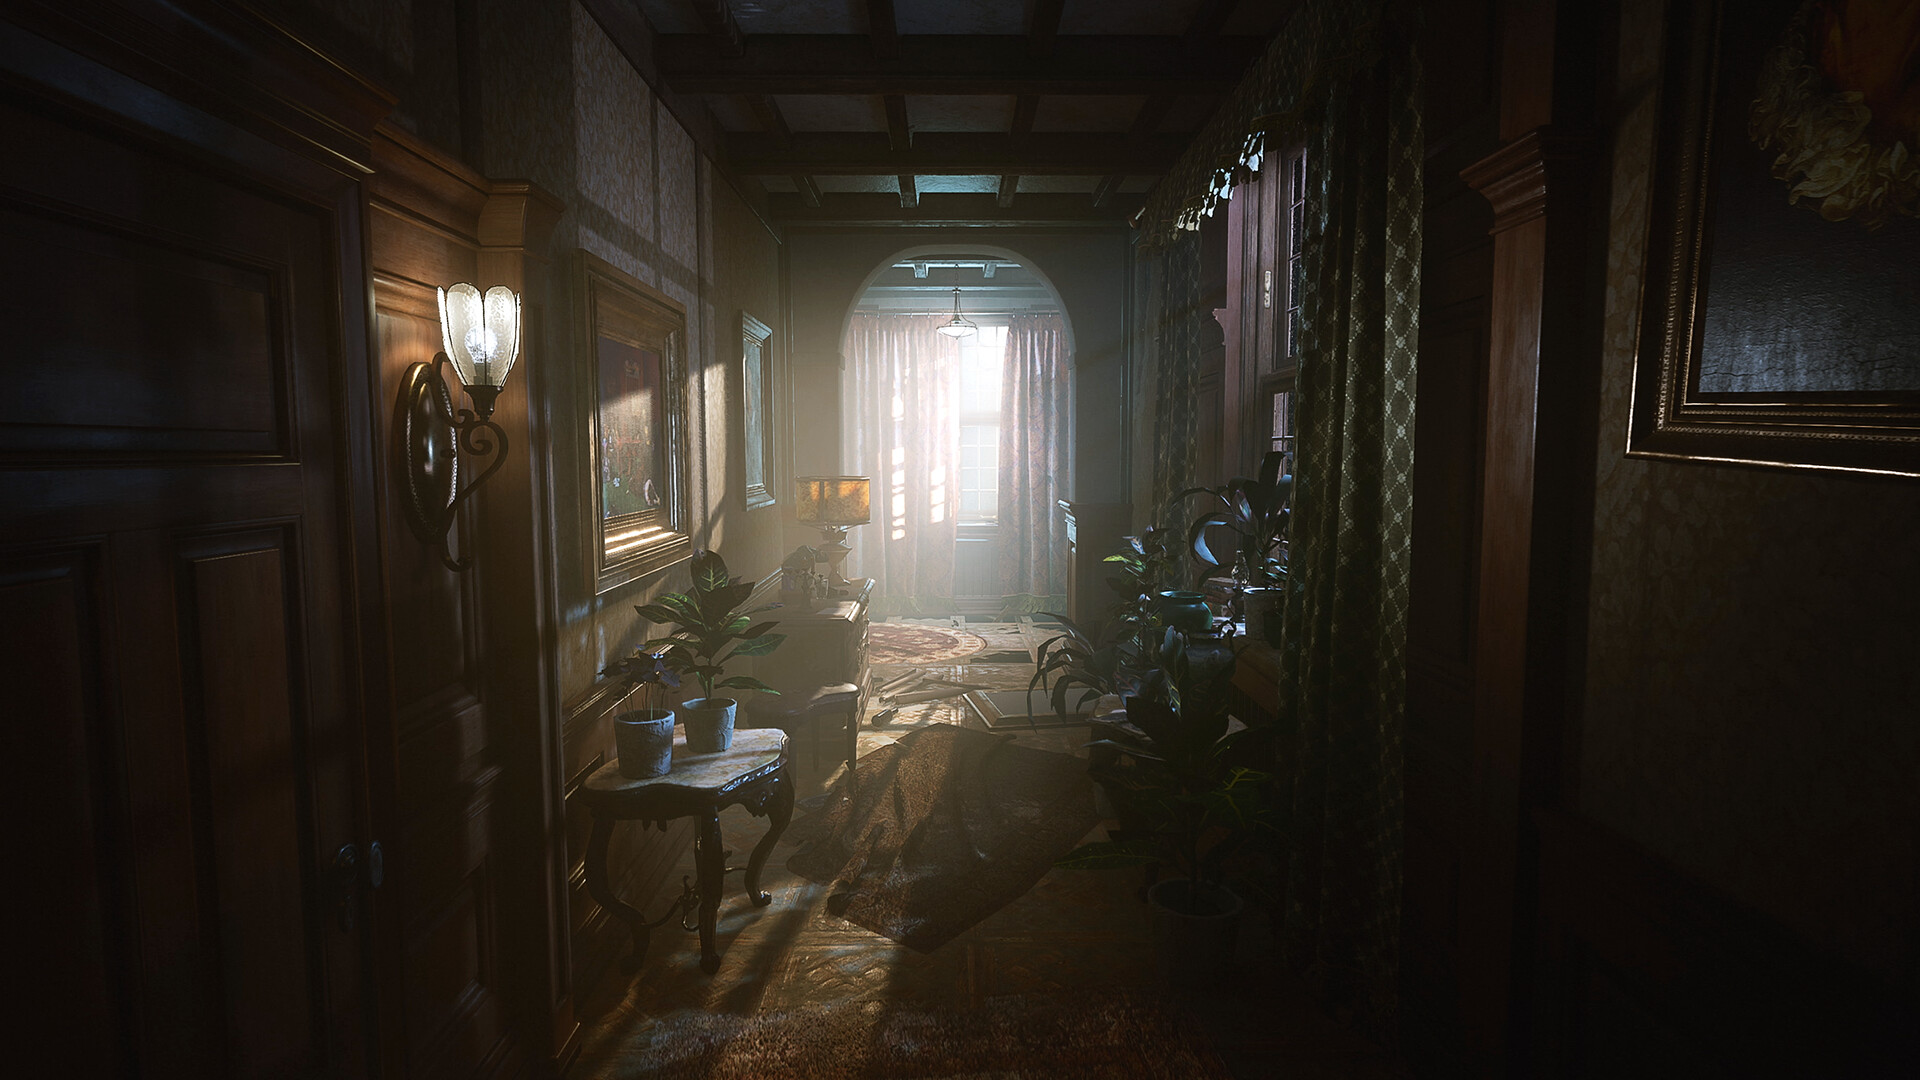 Buy Layers of Fear from the Humble Store